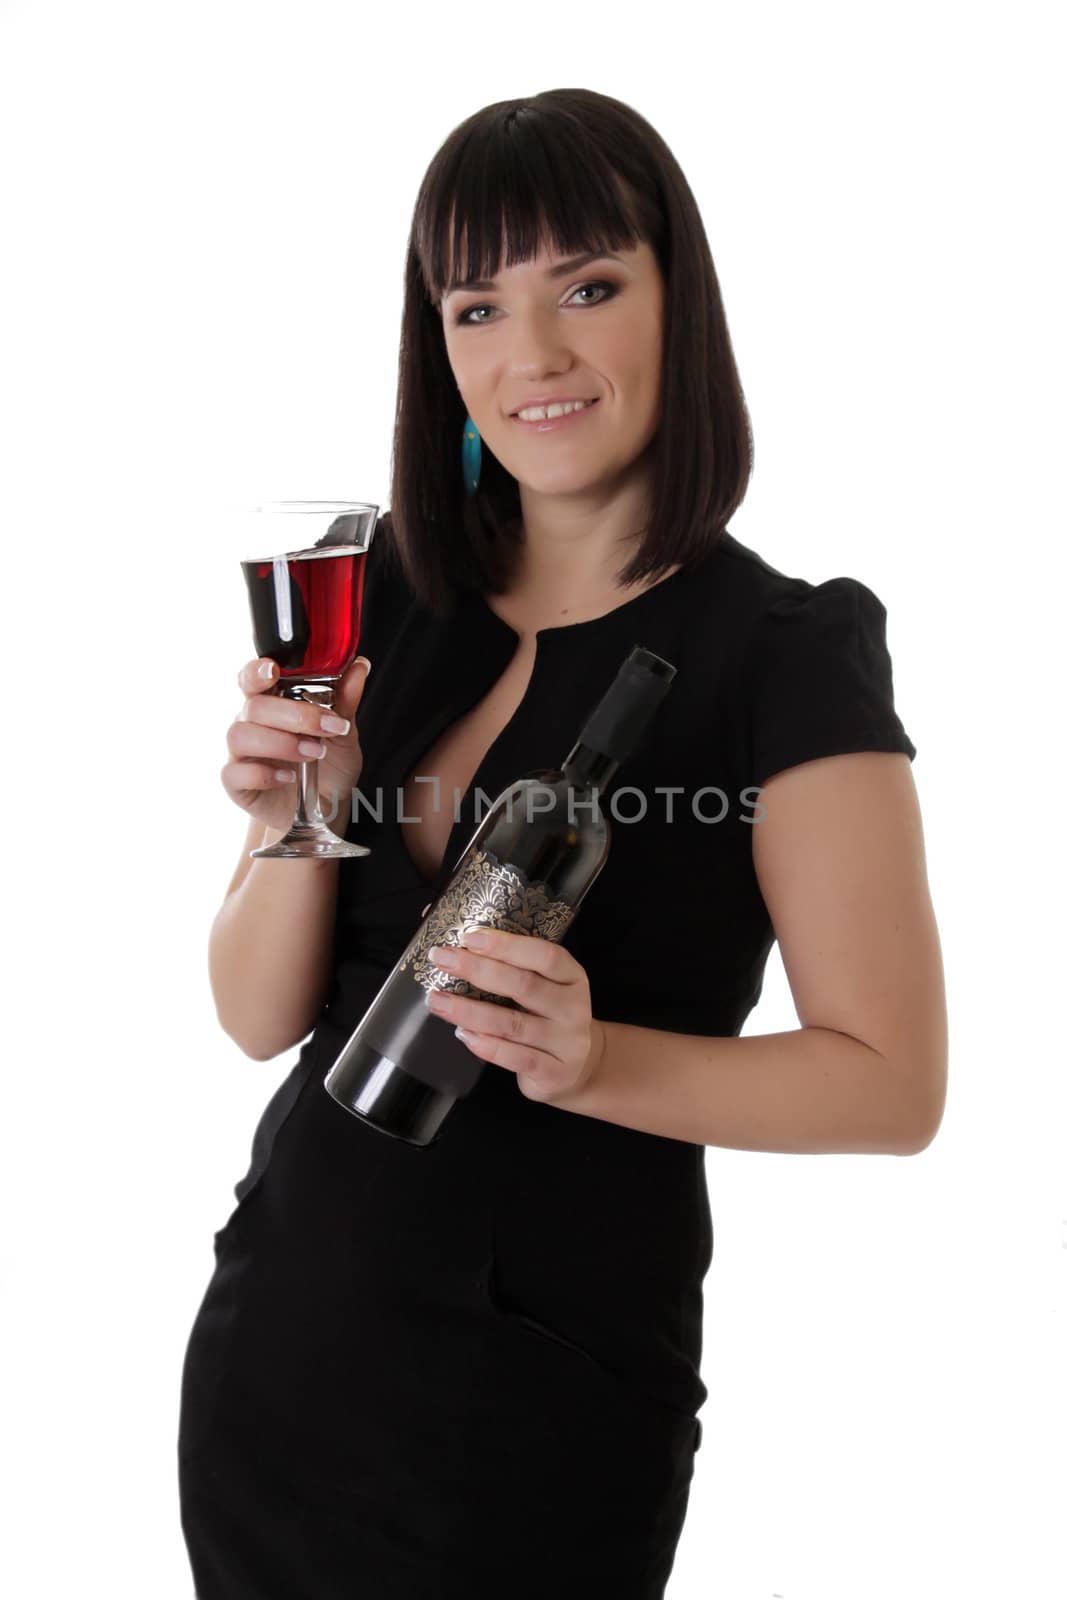 Elegant woman in dress with red wine glass and bottle over white